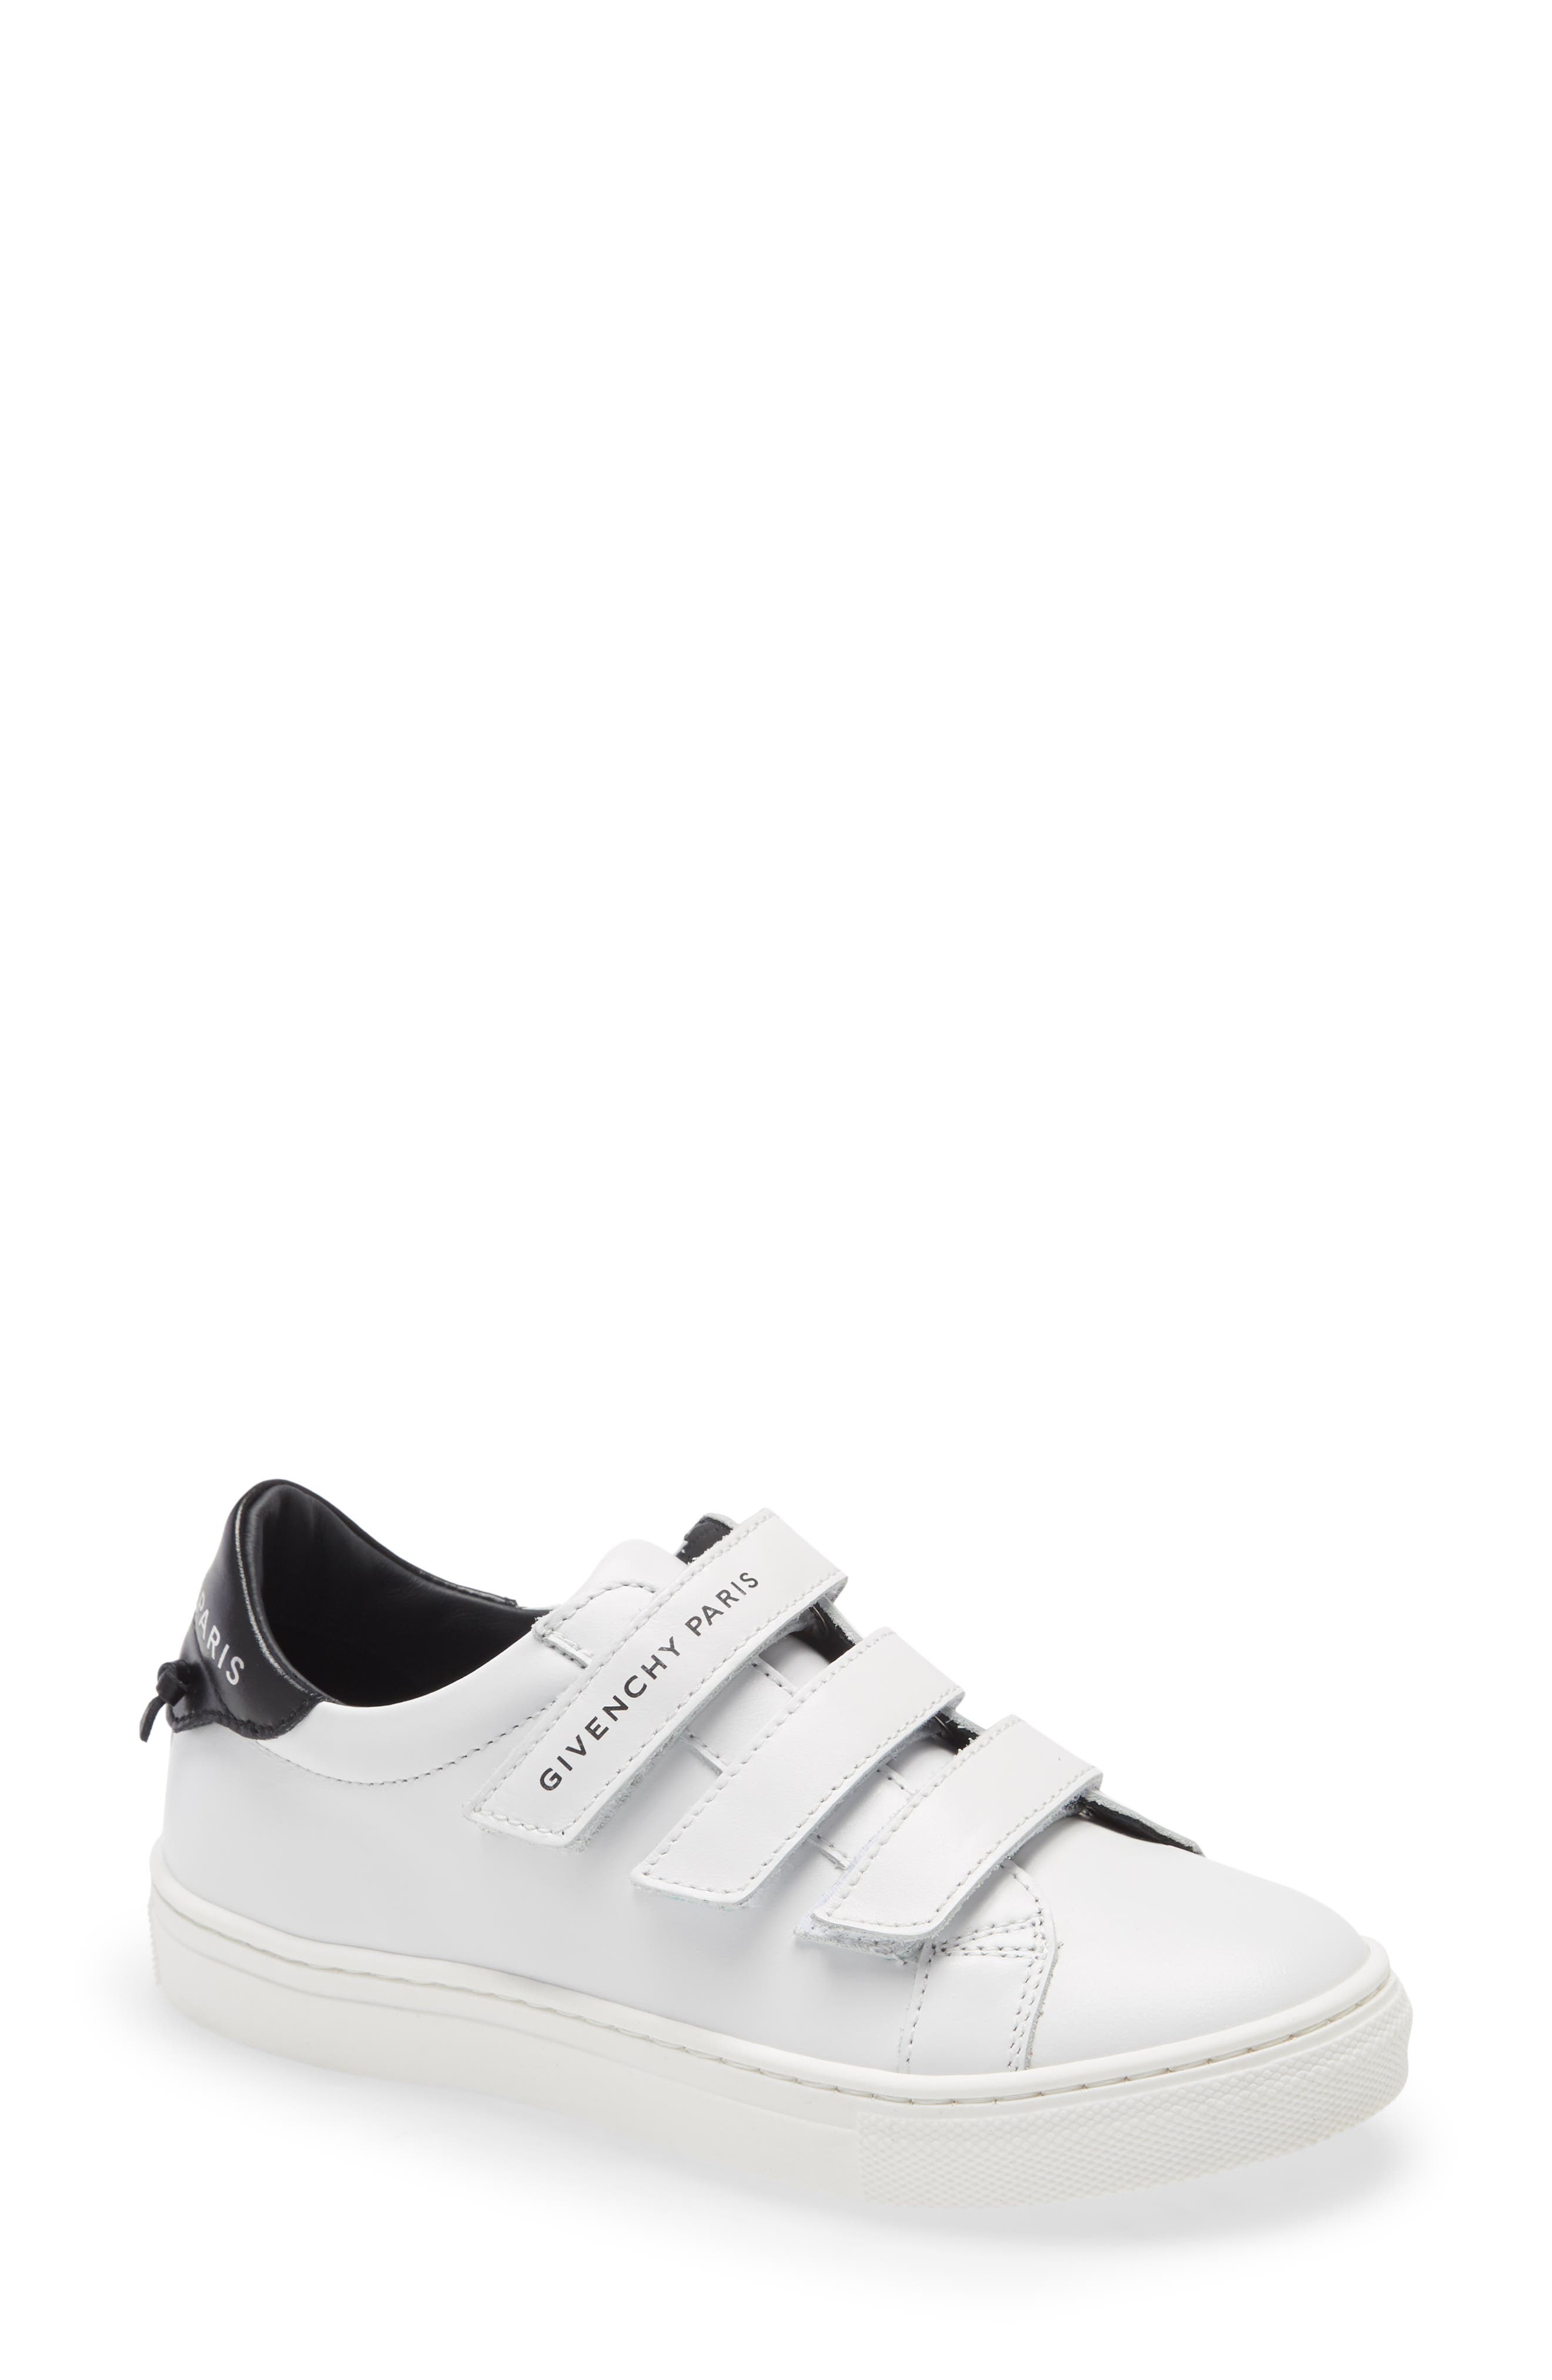 givenchy kids shoes